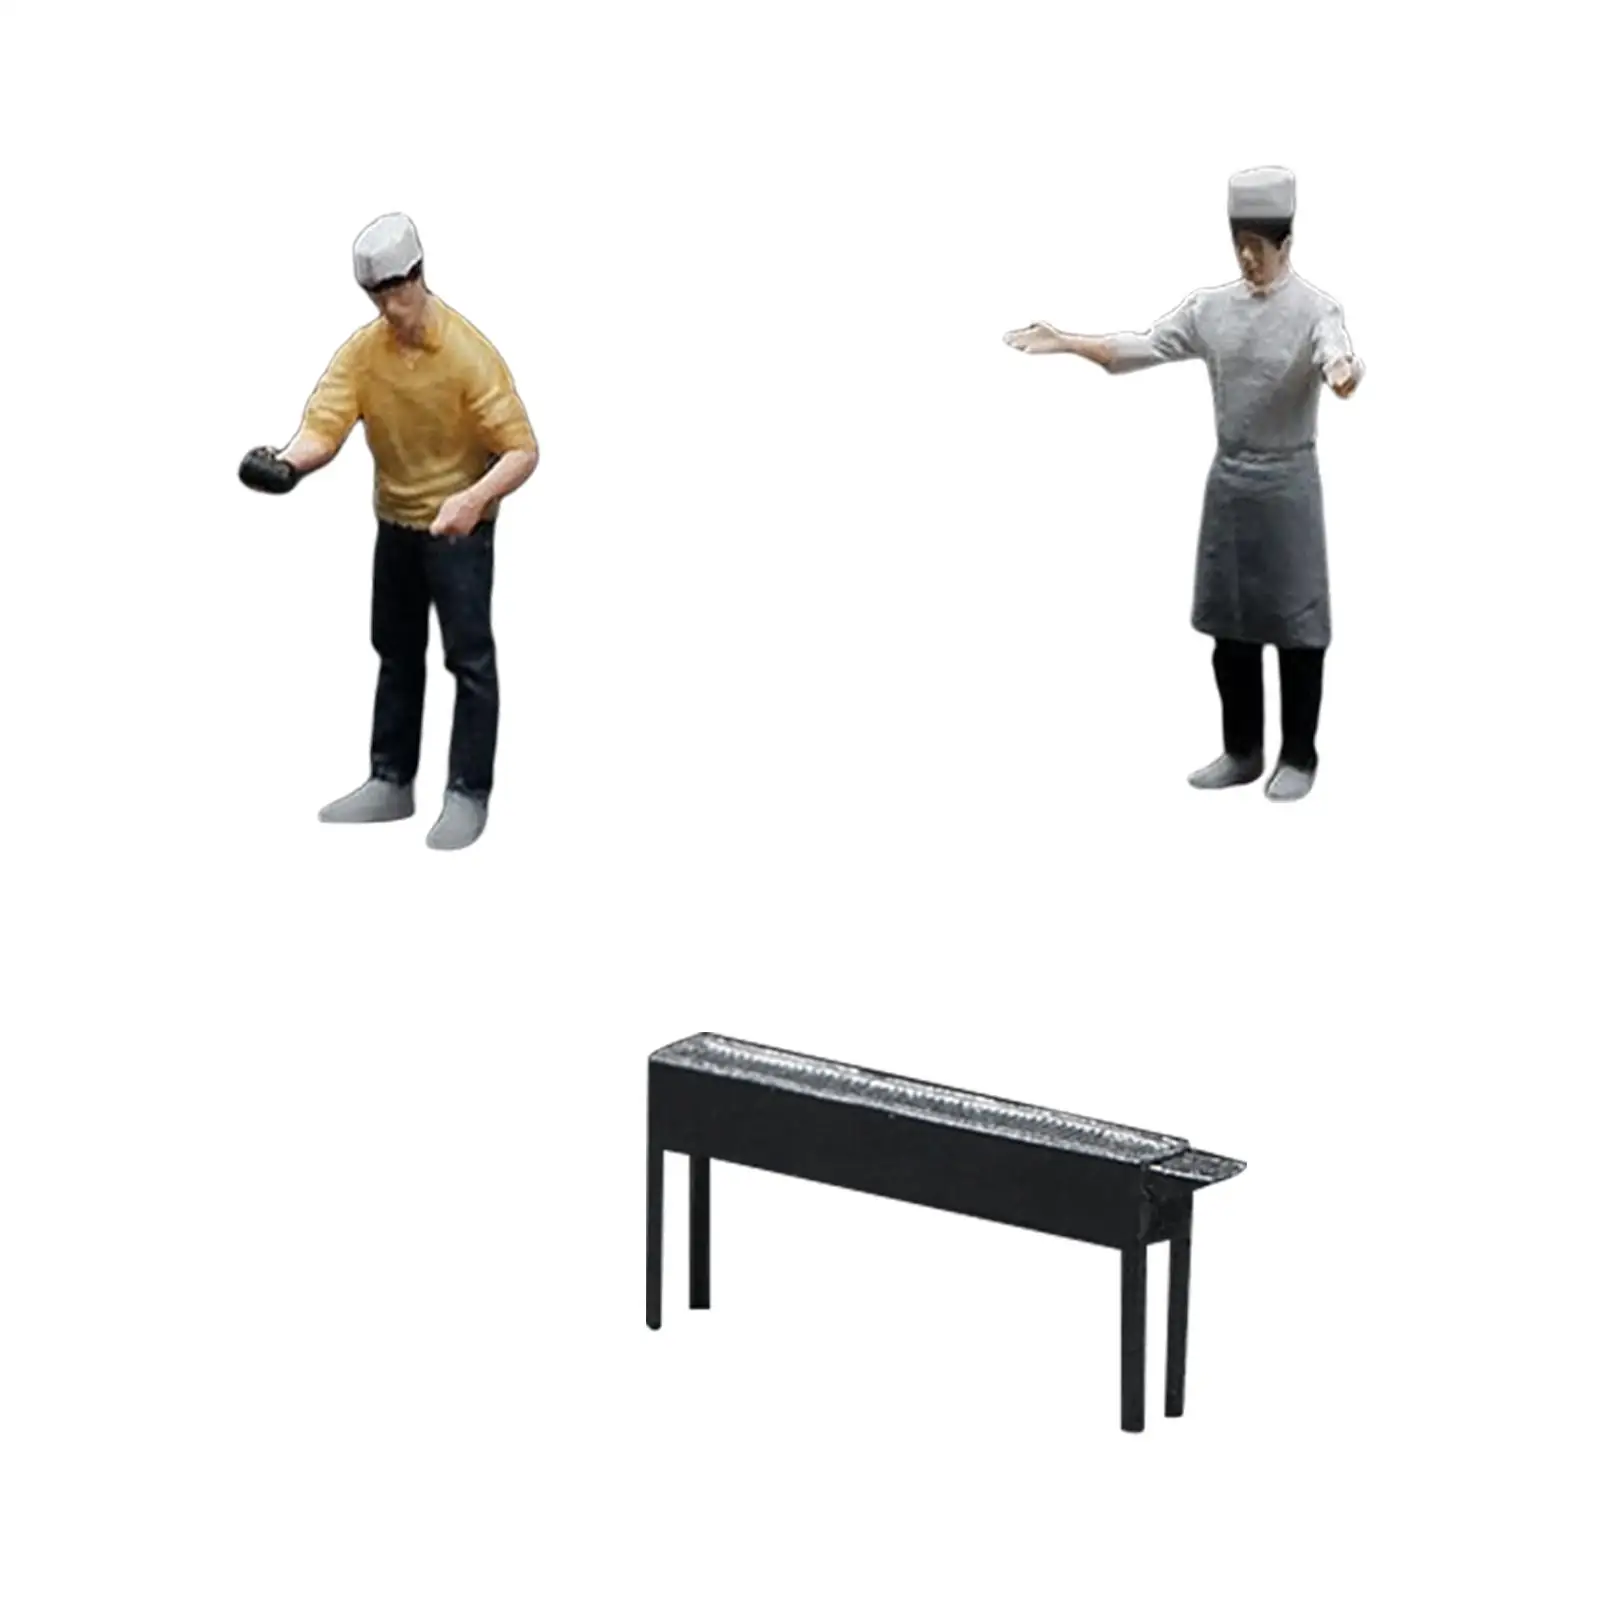 1/64 BBQ Chef Figures Diorama Scenery Train Railway Collections DIY Projects Decor